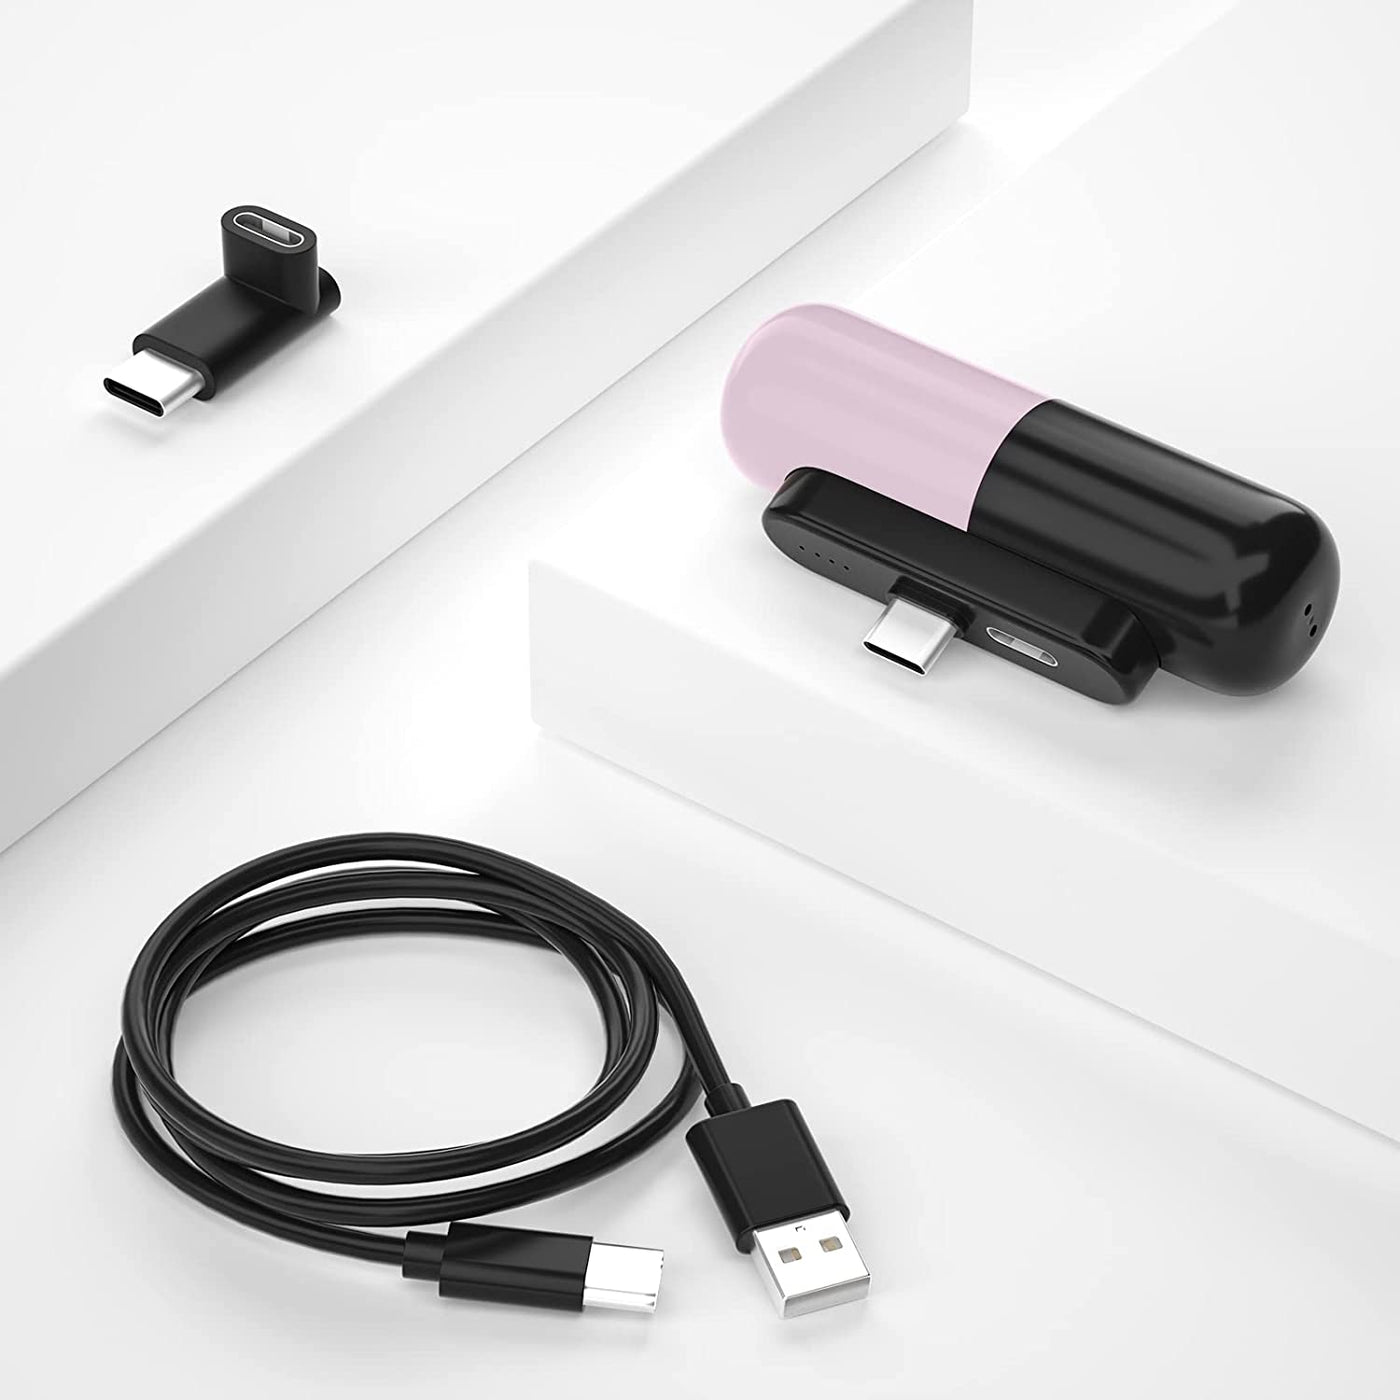 Mini Portable Charger for Android Phones